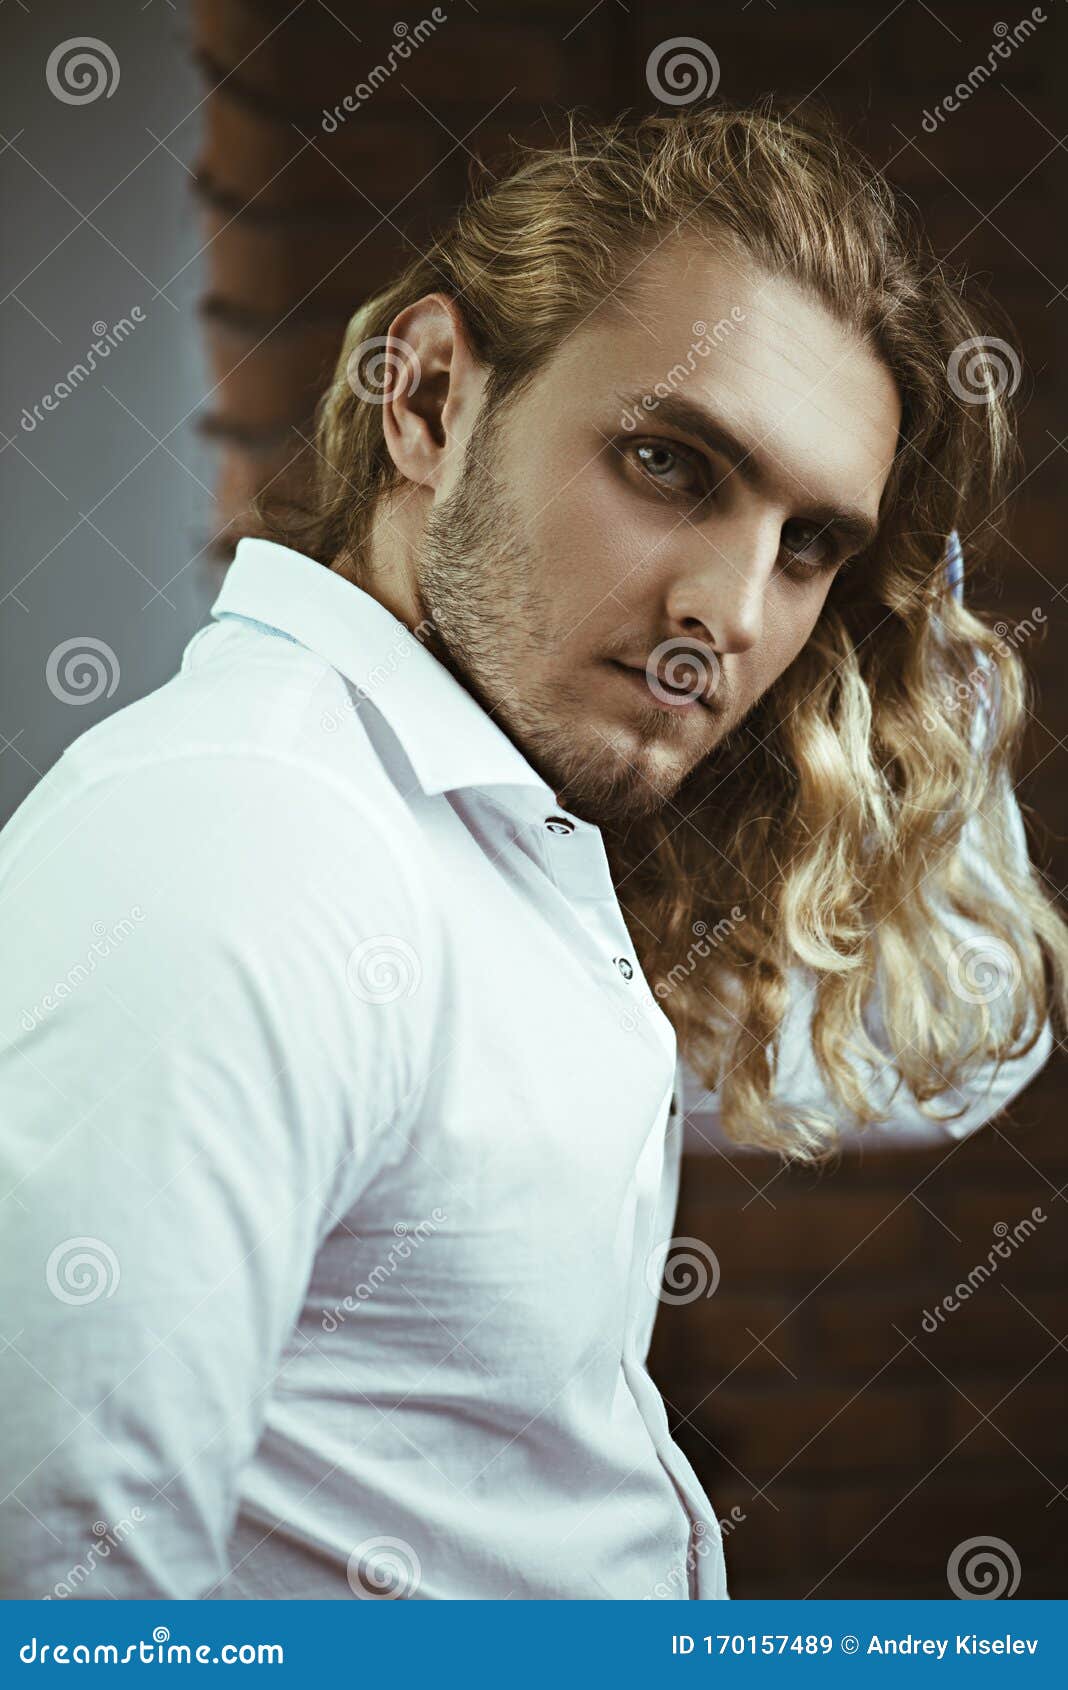 Curly blond man stock image. Image of adult, handsome - 170157489